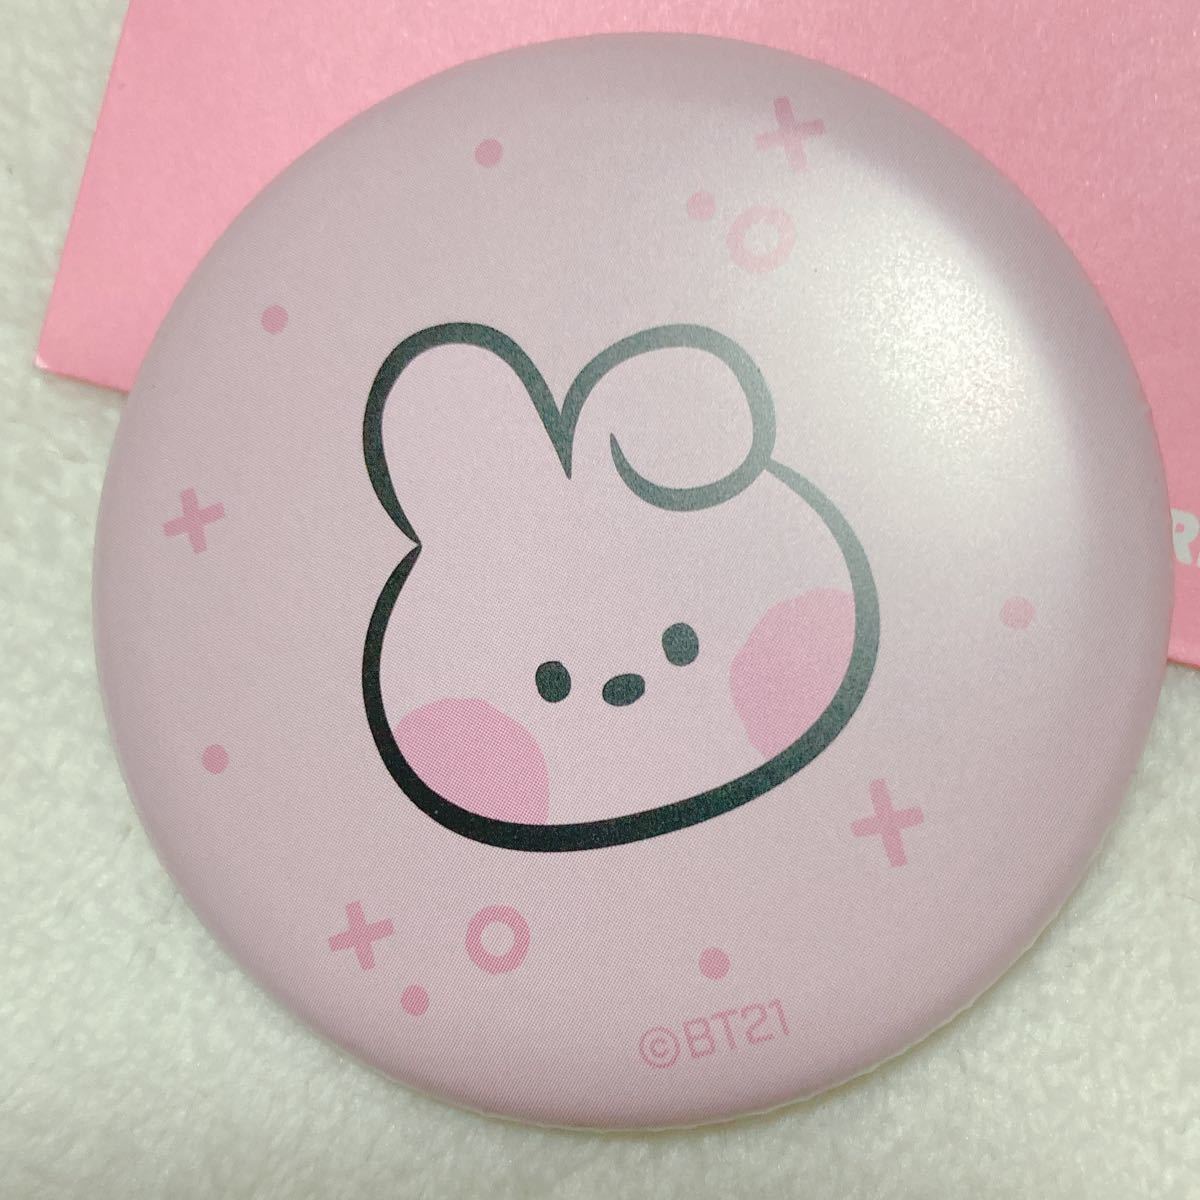 BT21 minini cooky 缶バッジ cafe限定